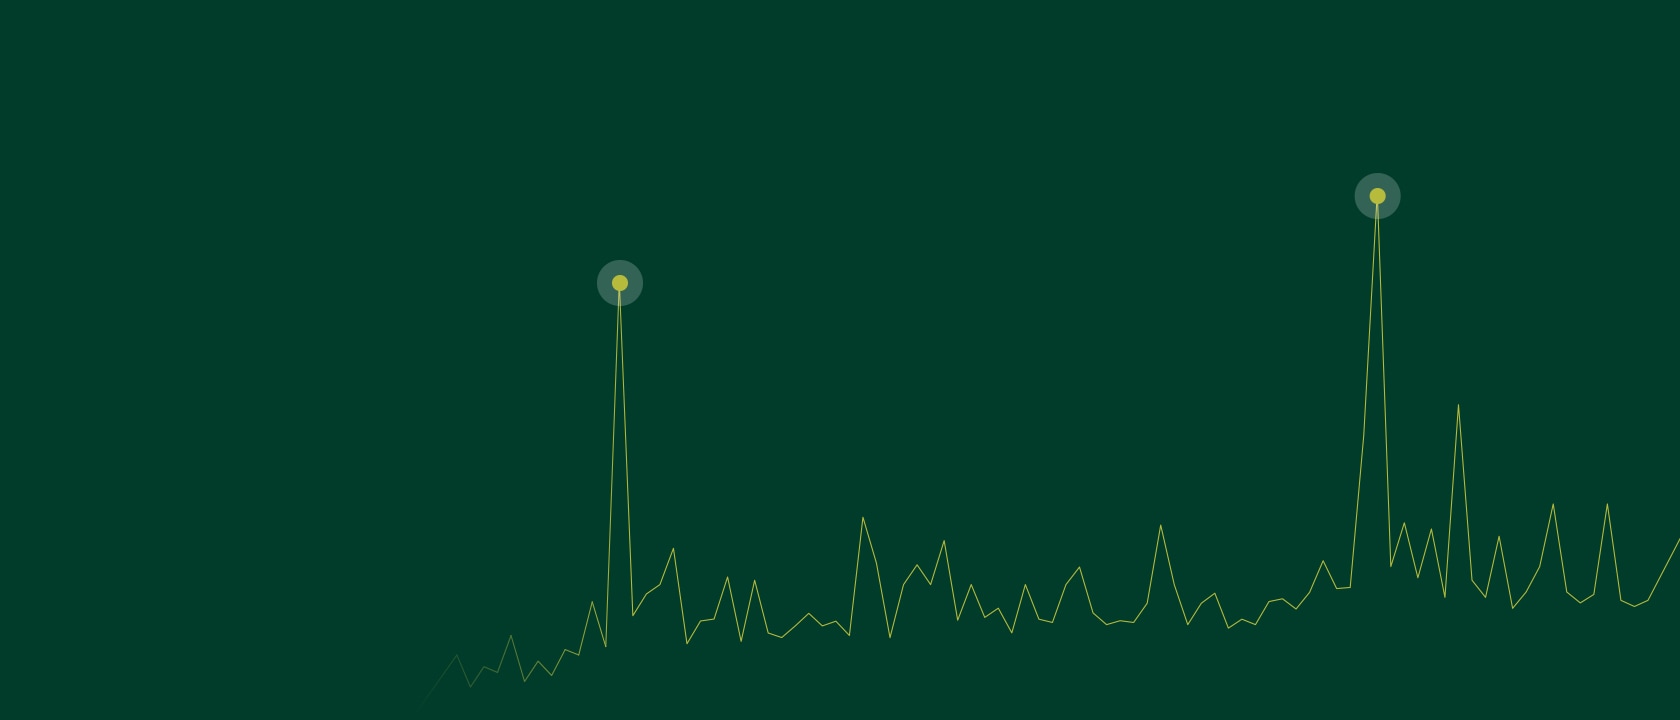 Yellow line graph on green background